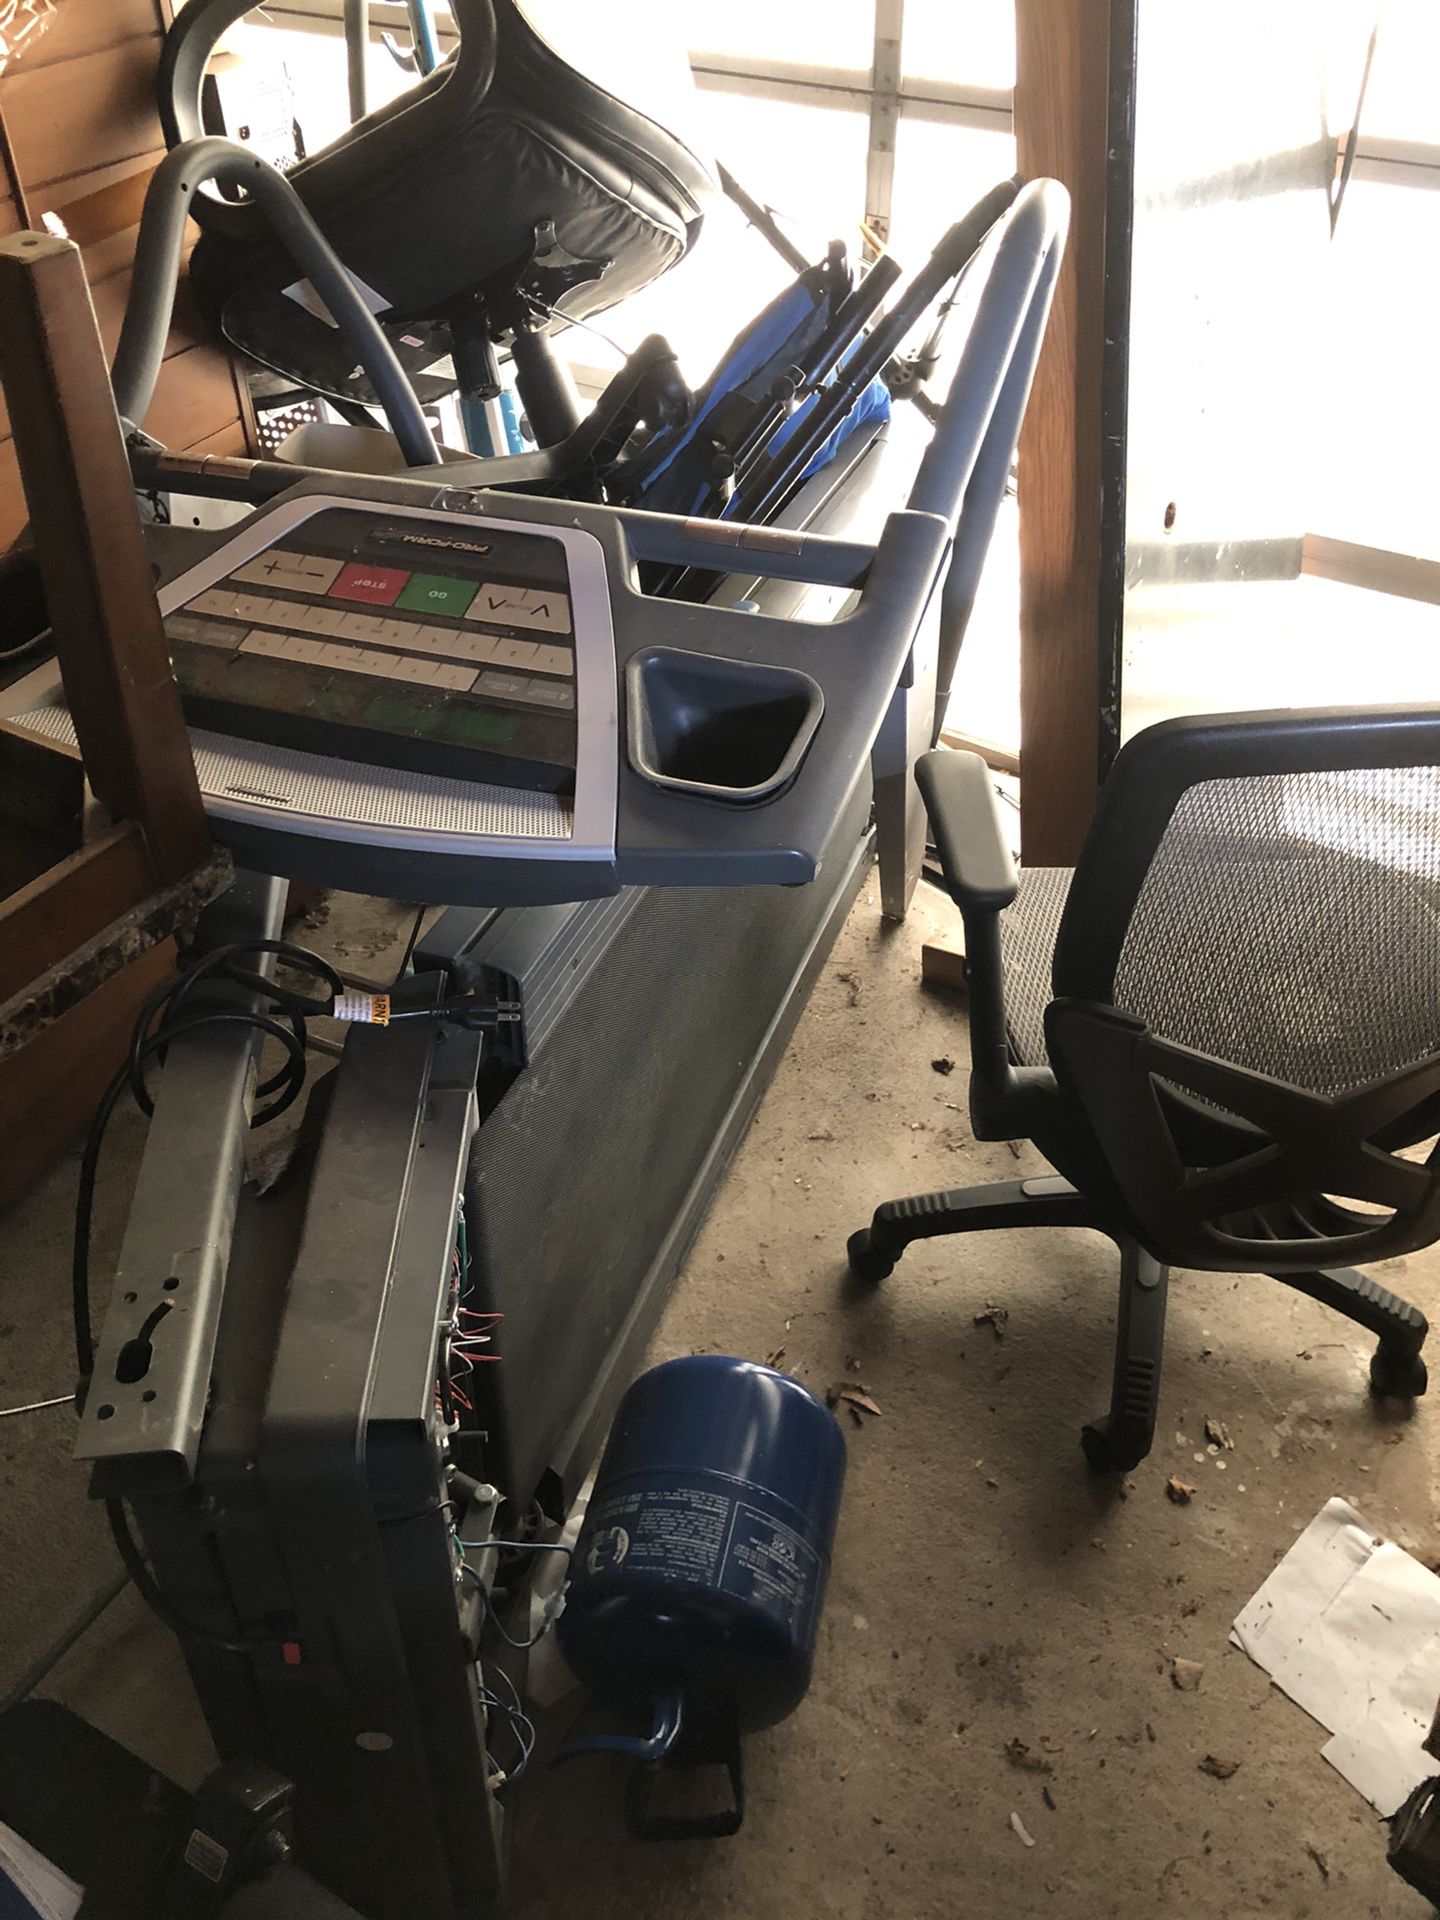 Treadmill for Runnning/Walking Machine AS IS CONDITION